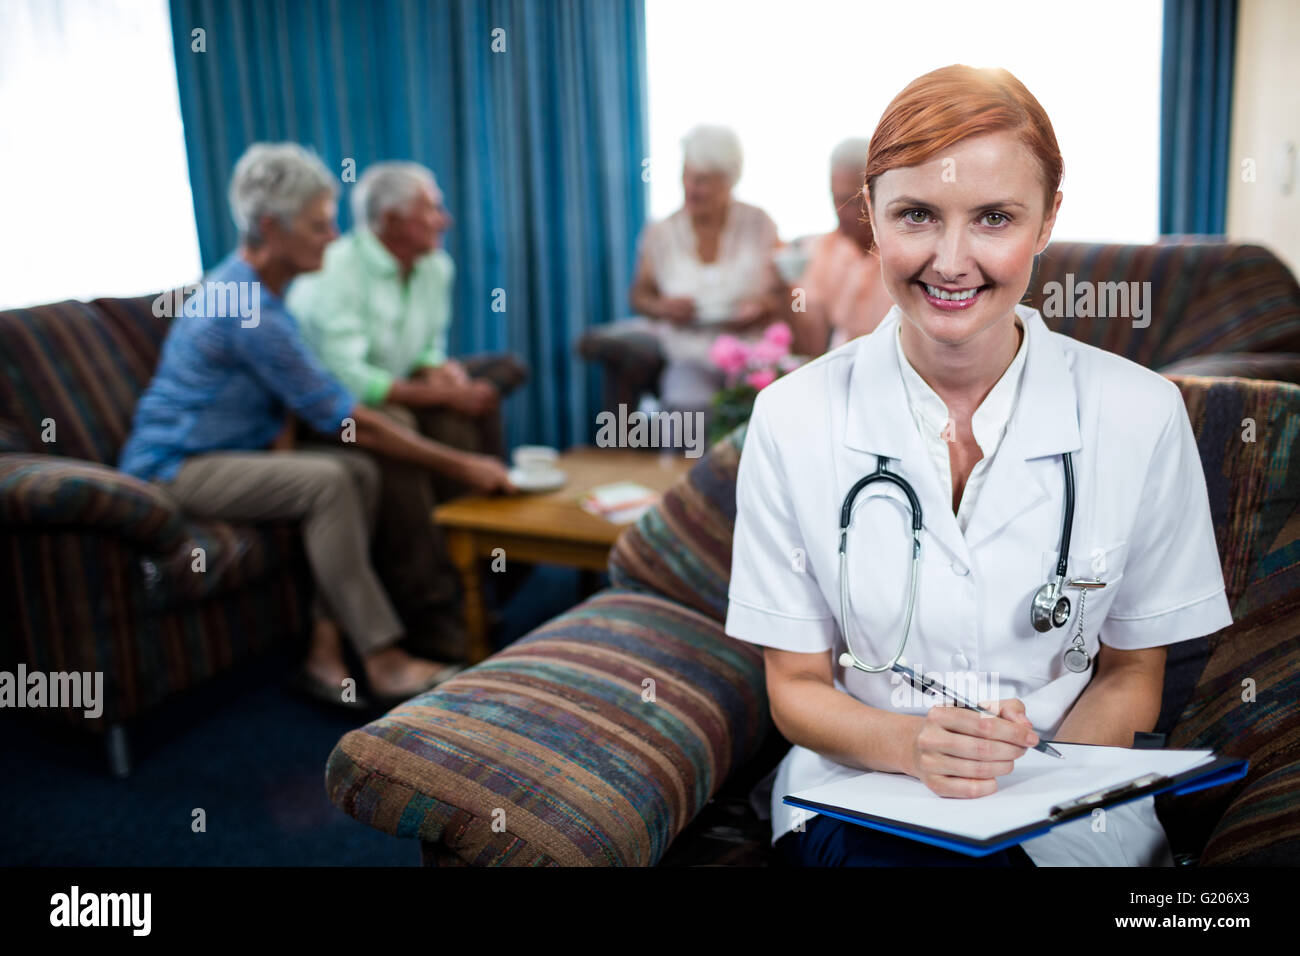 Portrait of a nurse with pensioners in background Stock Photo